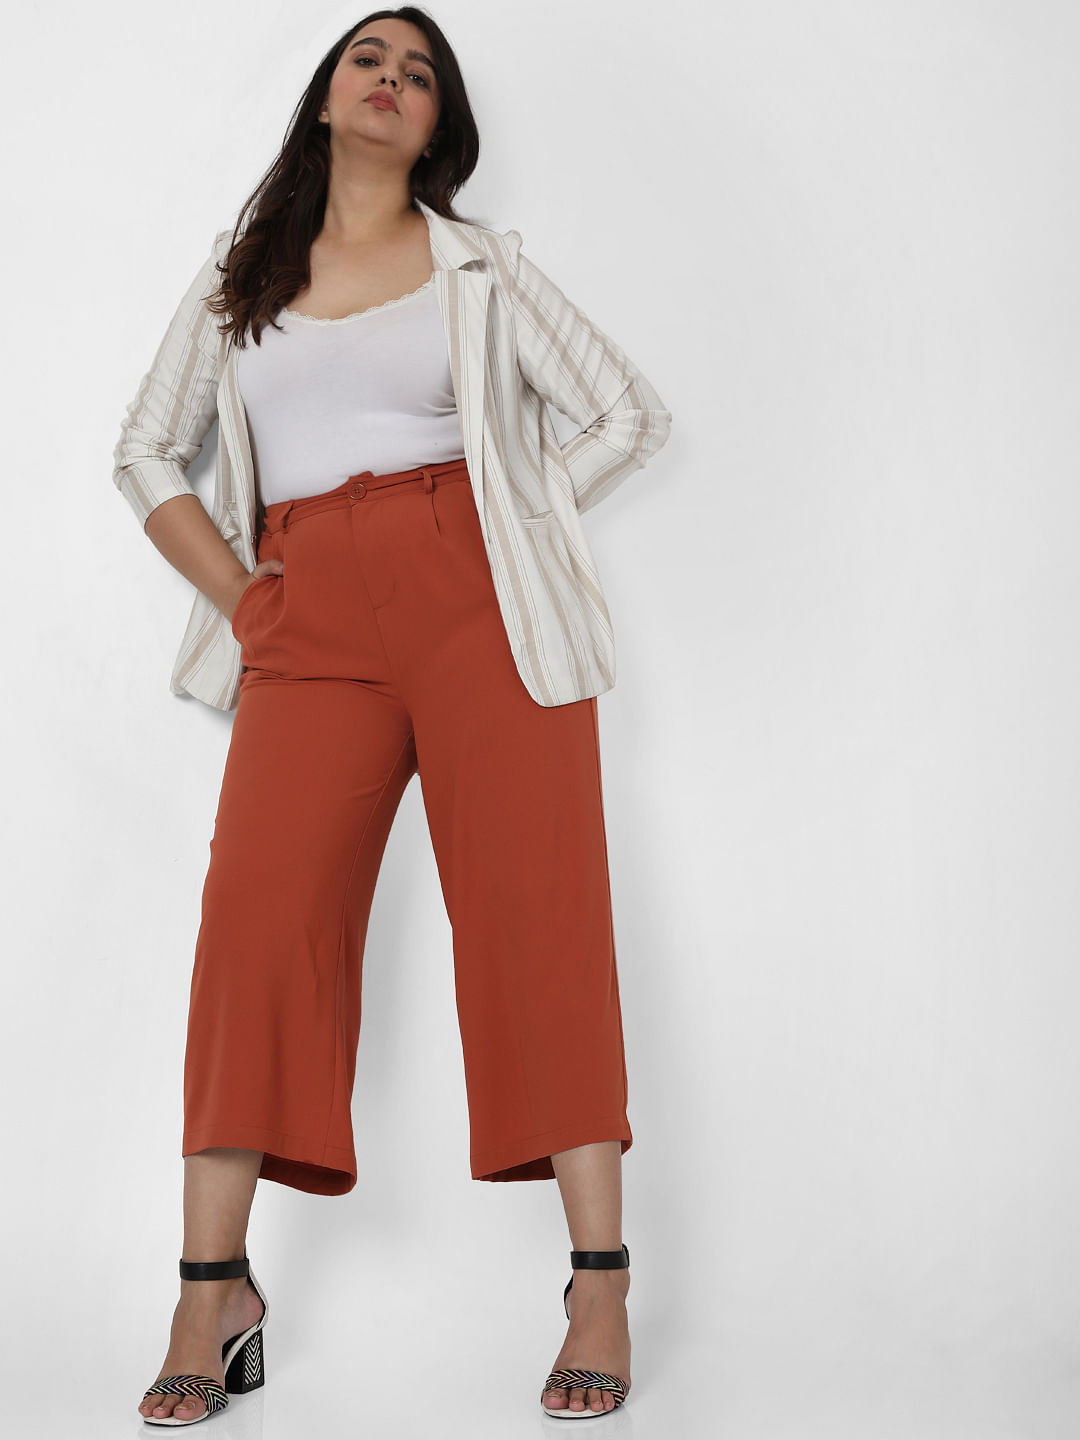 Buy Women Regular Fit Solid Trousers Red Solid Cotton for Best Price,  Reviews, Free Shipping